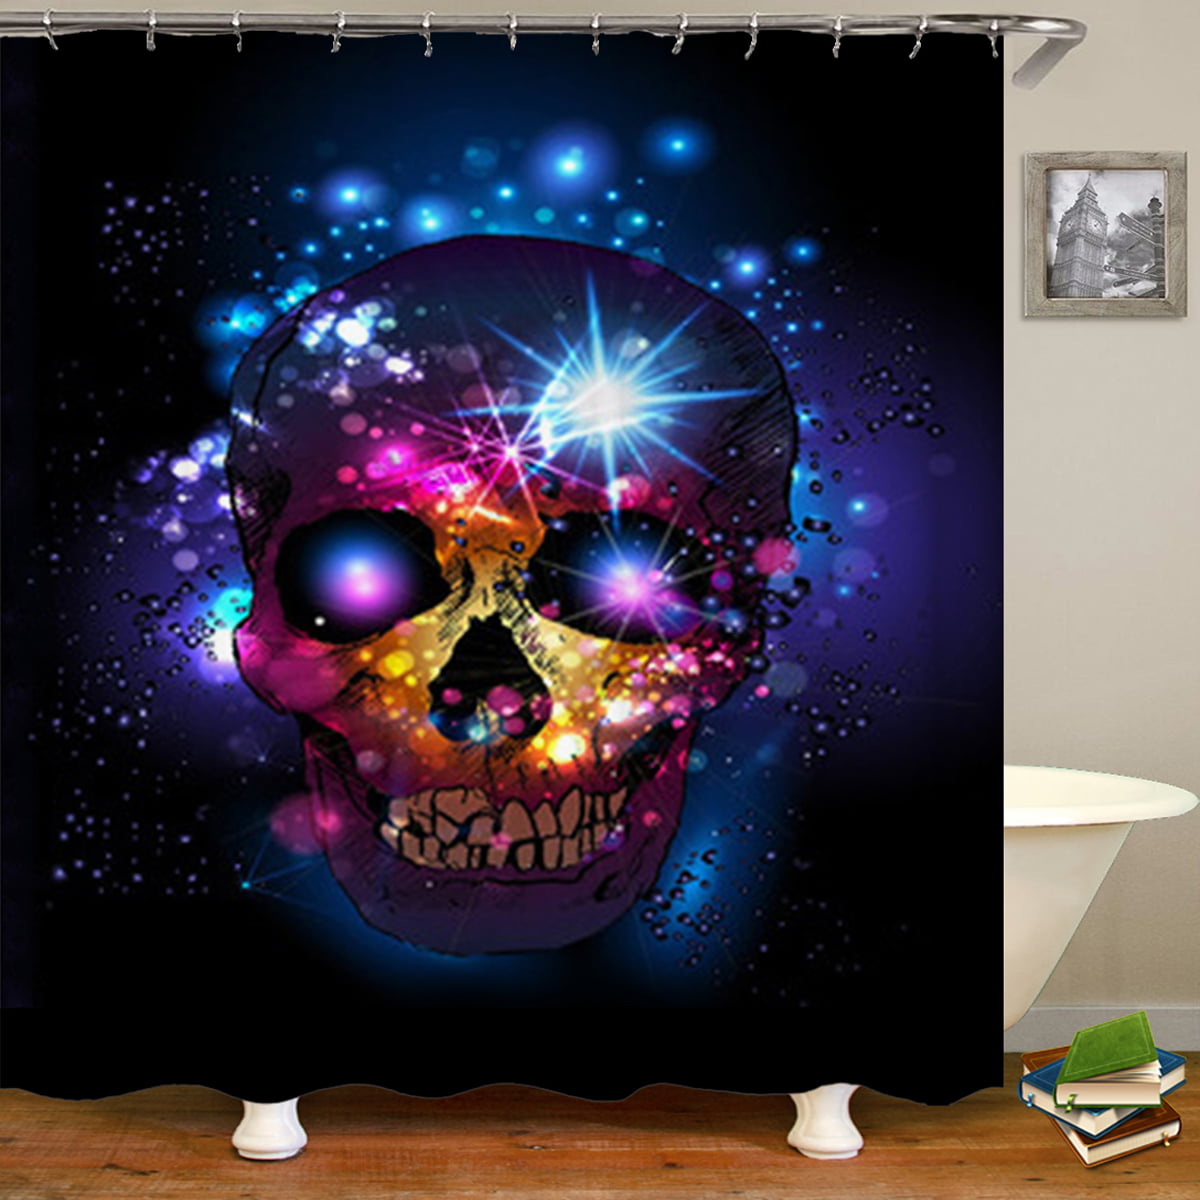 Polyester Fabric Day of the Dead Sugar Skull Shower Curtain Liner Bath Mat Hooks 